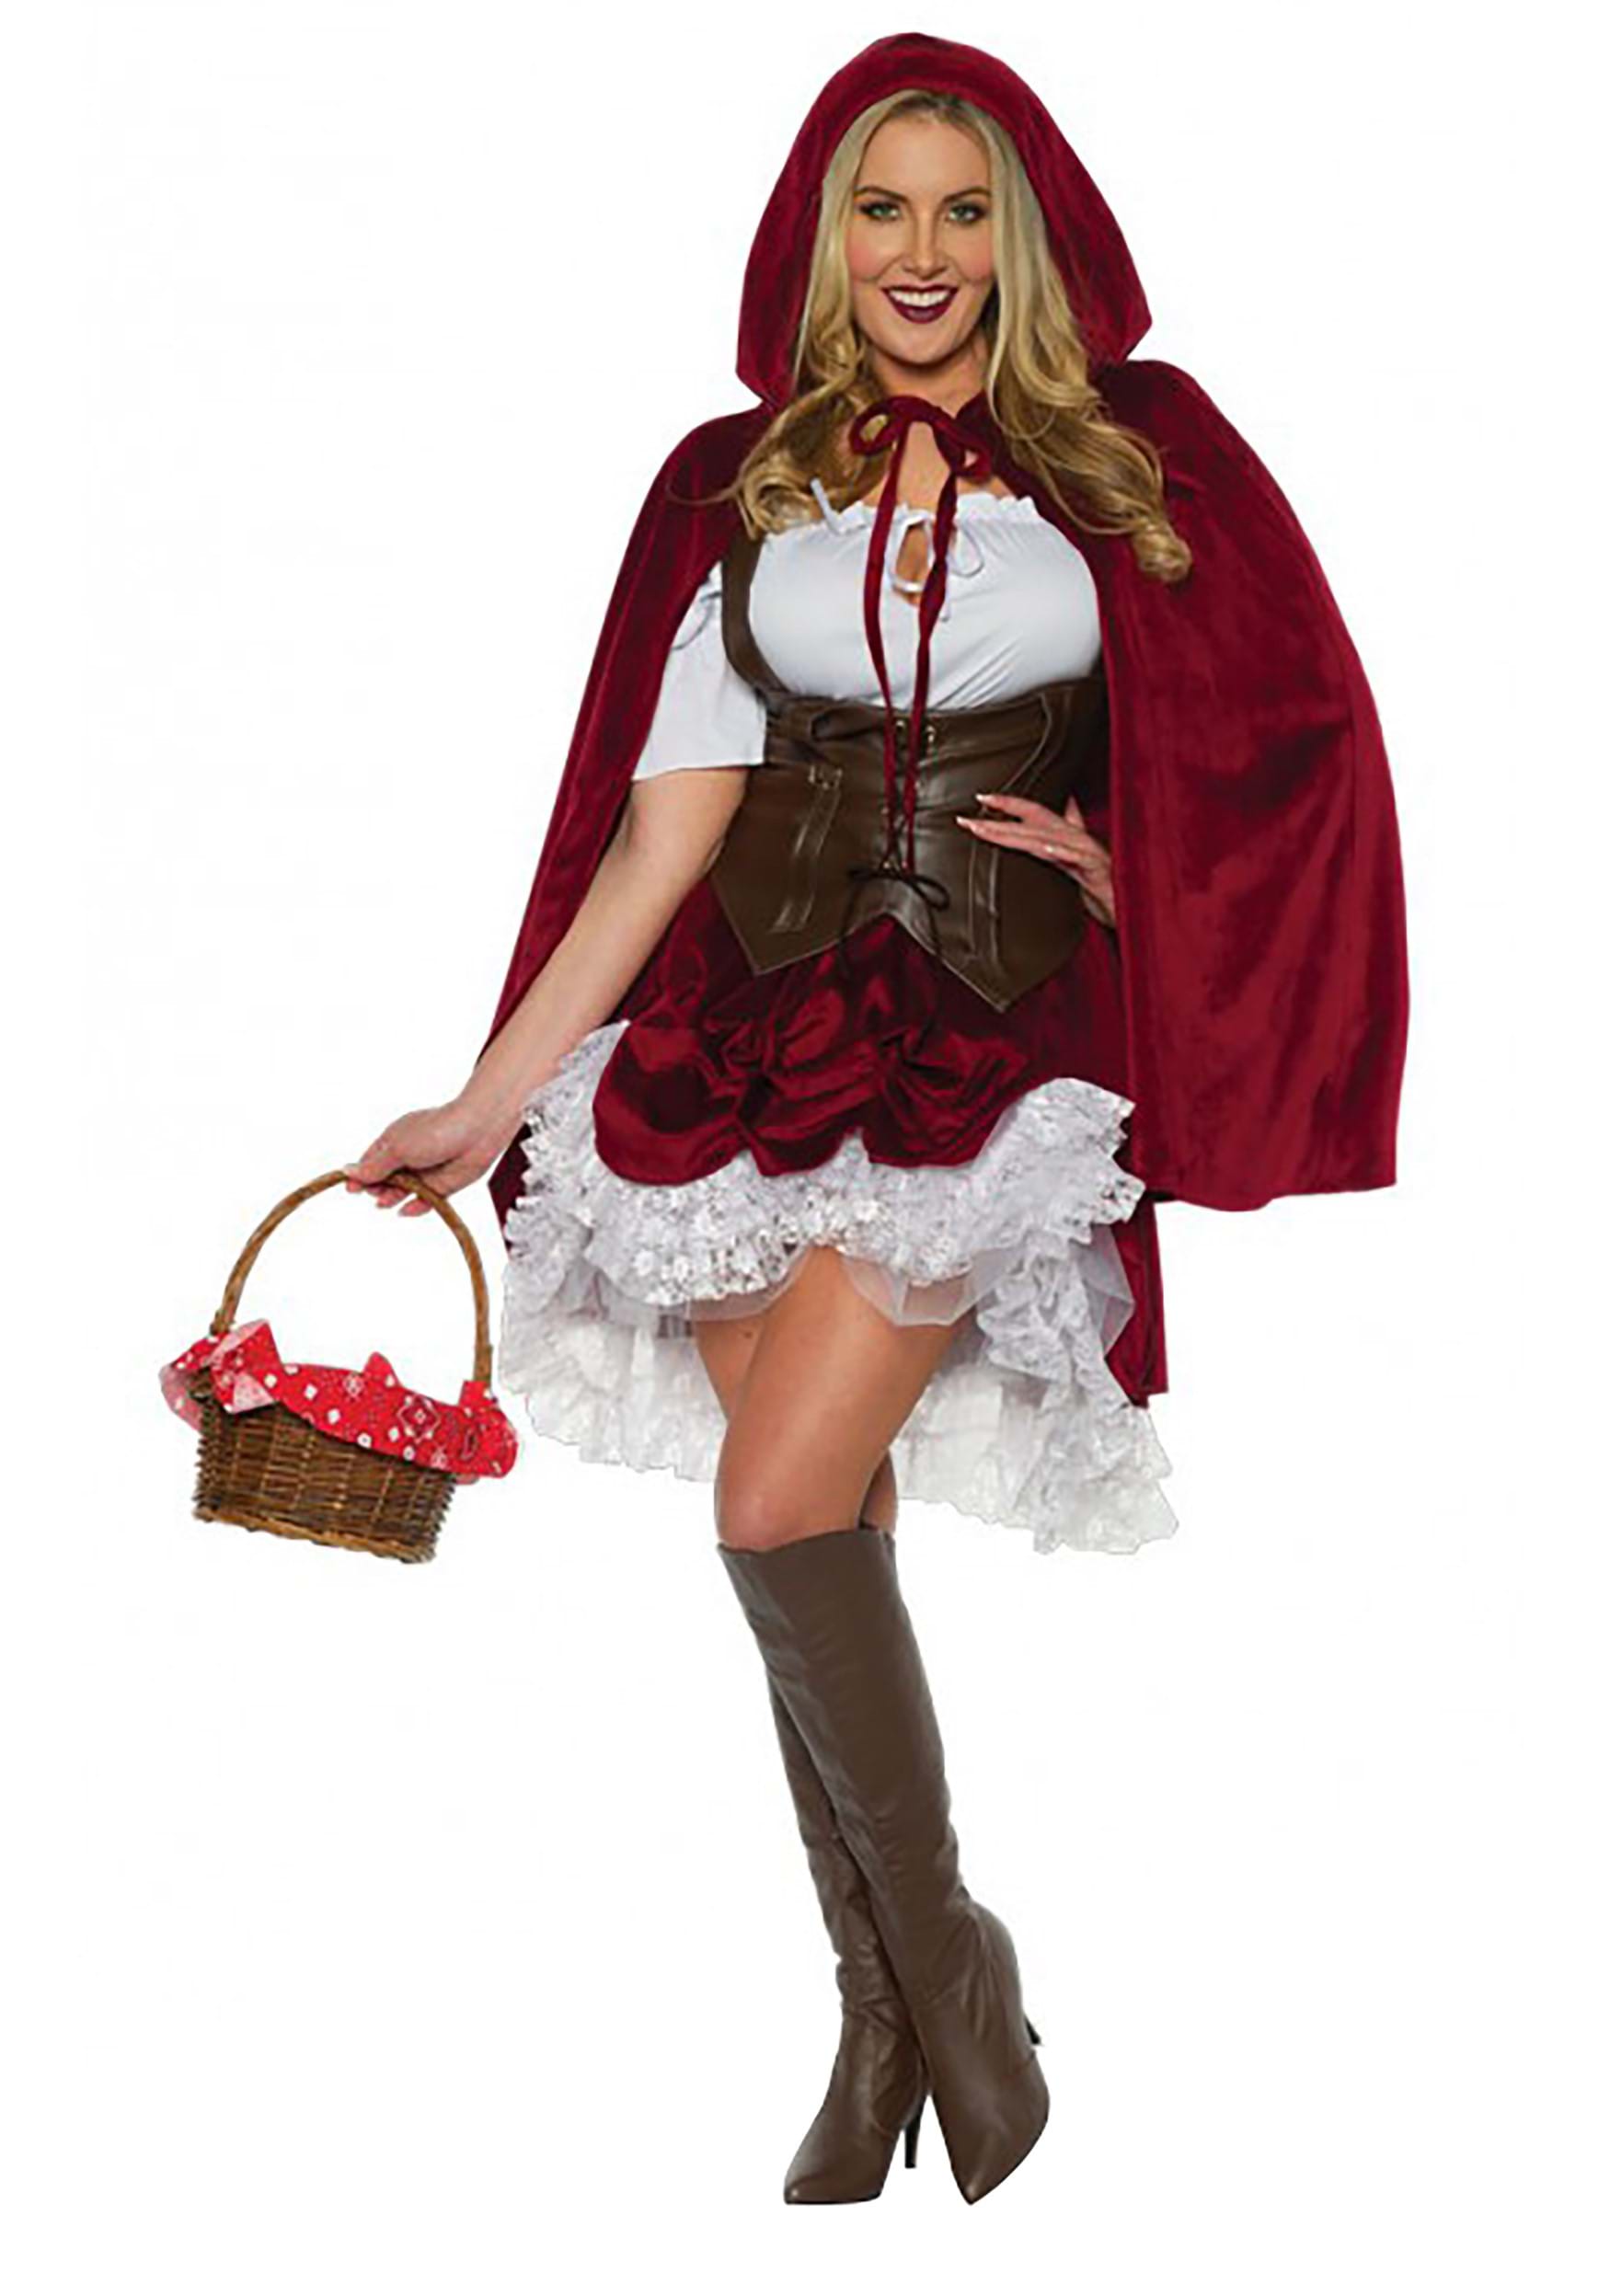 Adult Deluxe Red Riding Hood Costume